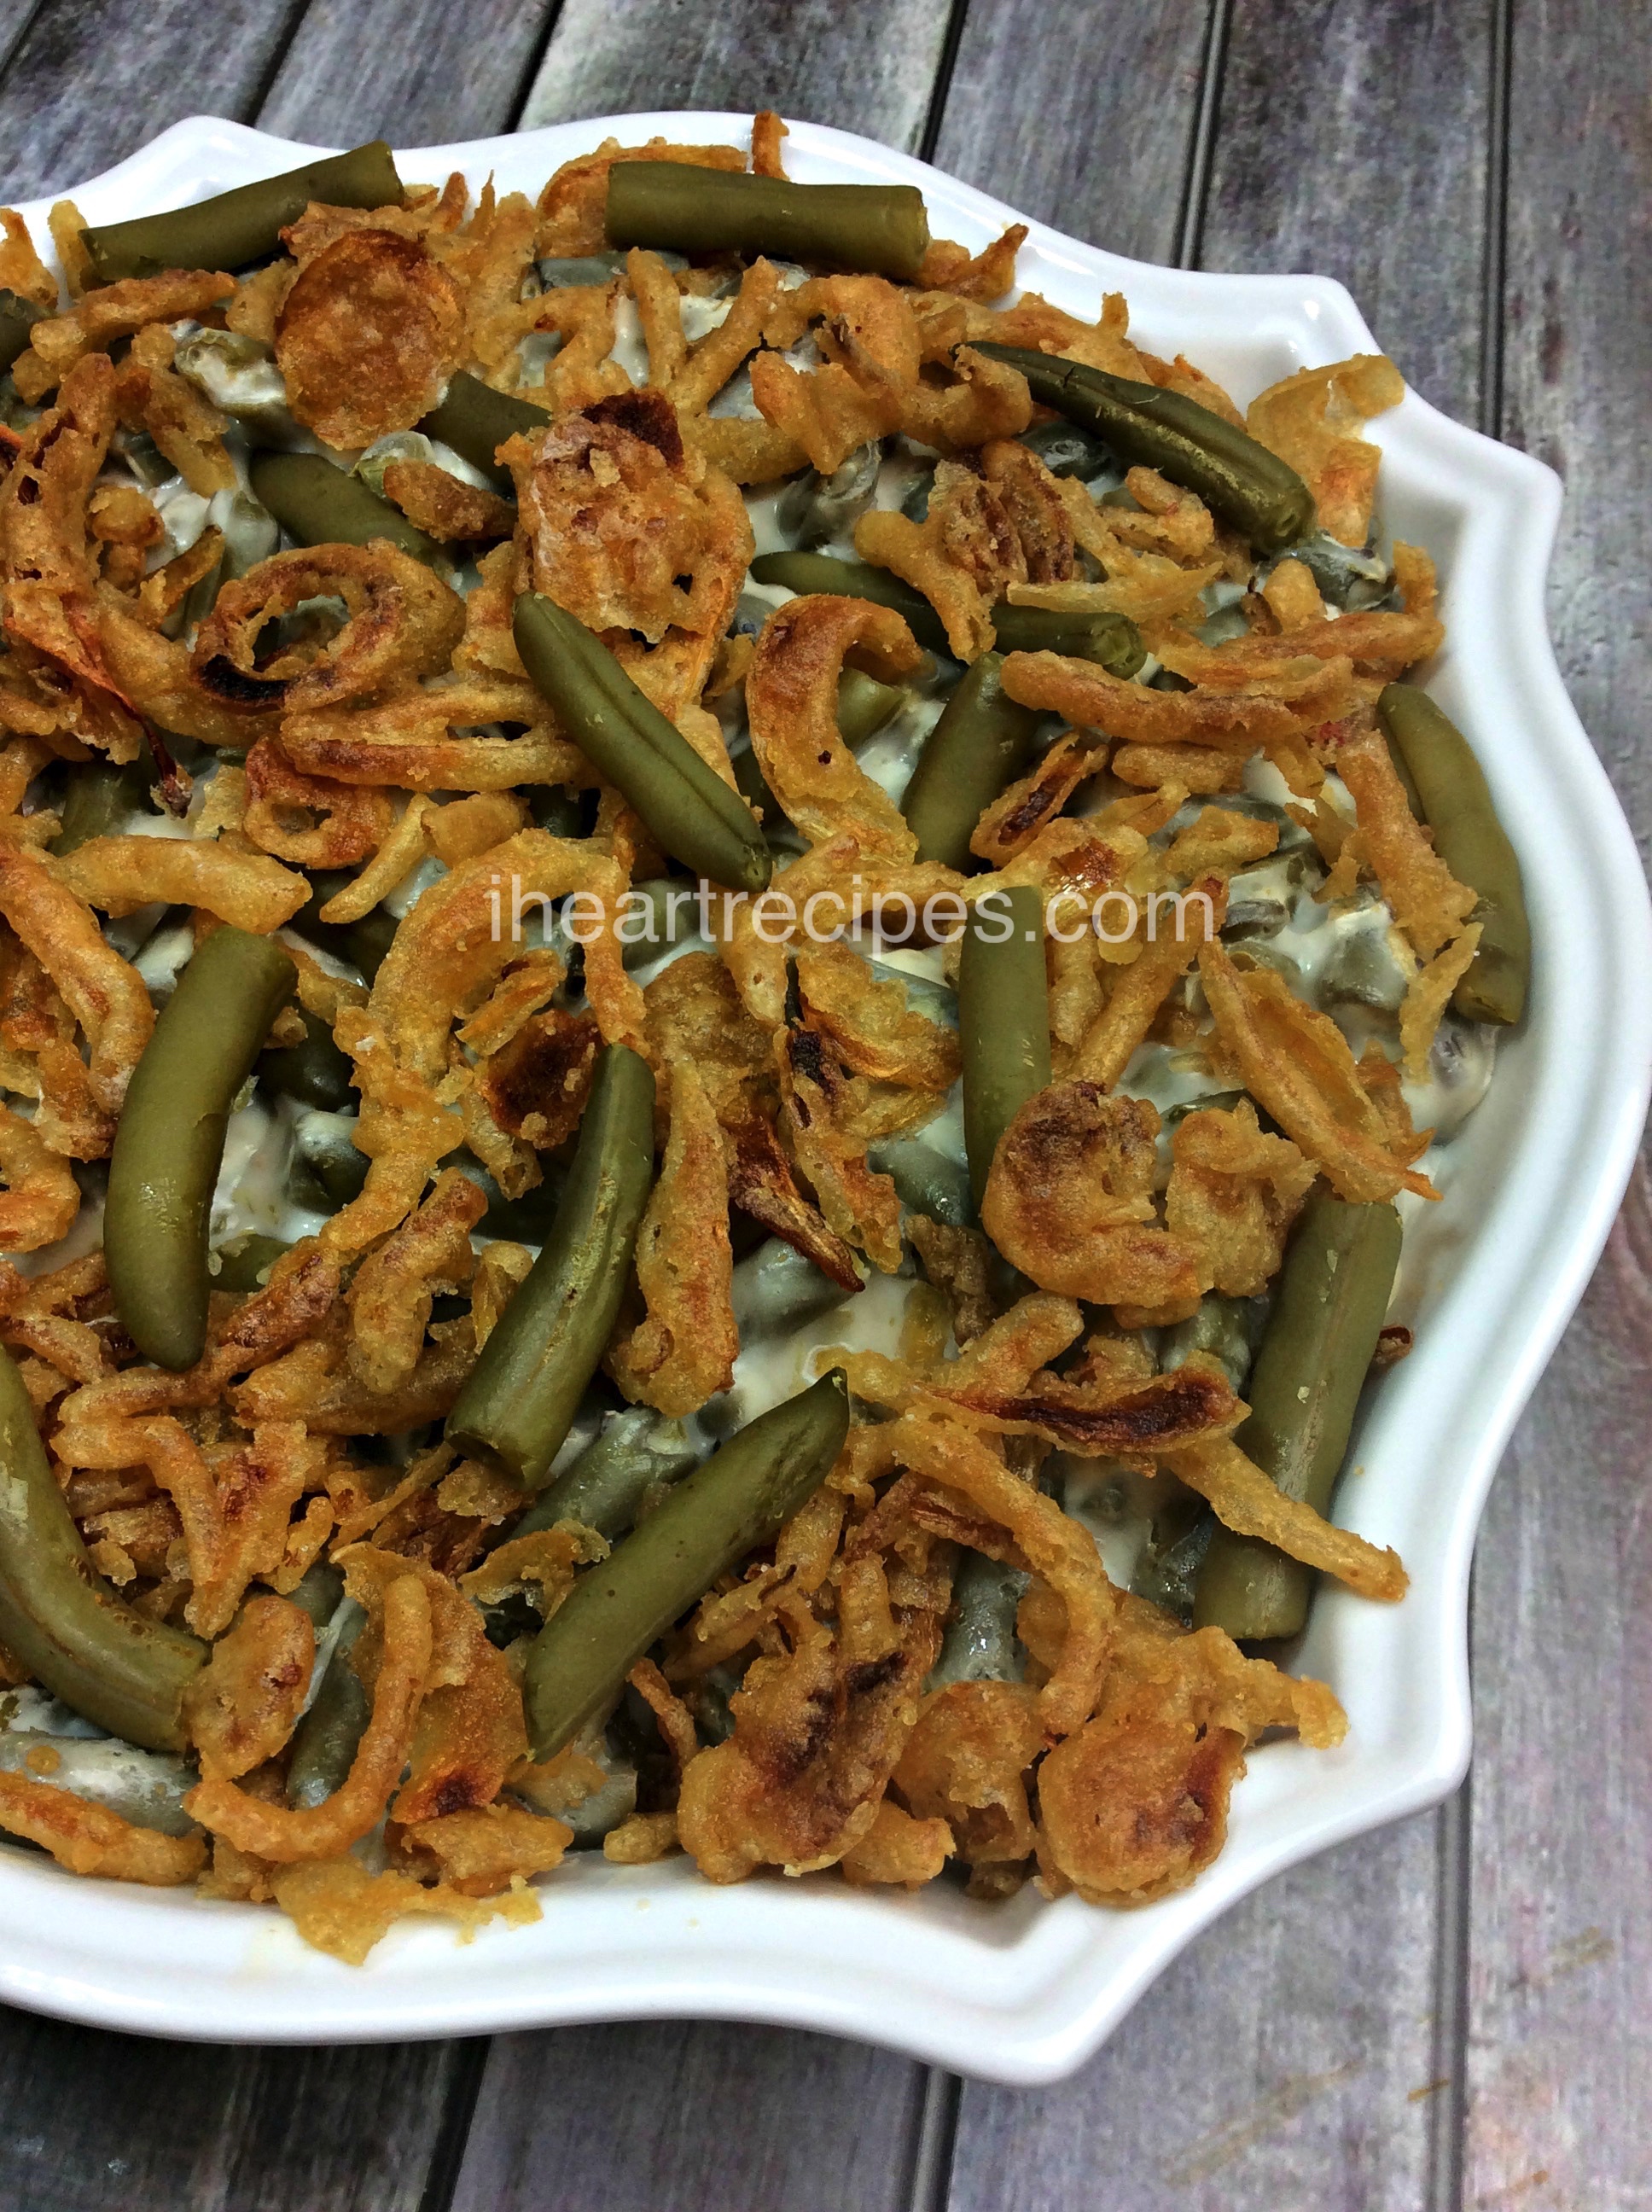 Crisp green beans and crunchy fried onions top with creamy casserole served in a white serving dish. This is the perfect side dish for a holiday meal!